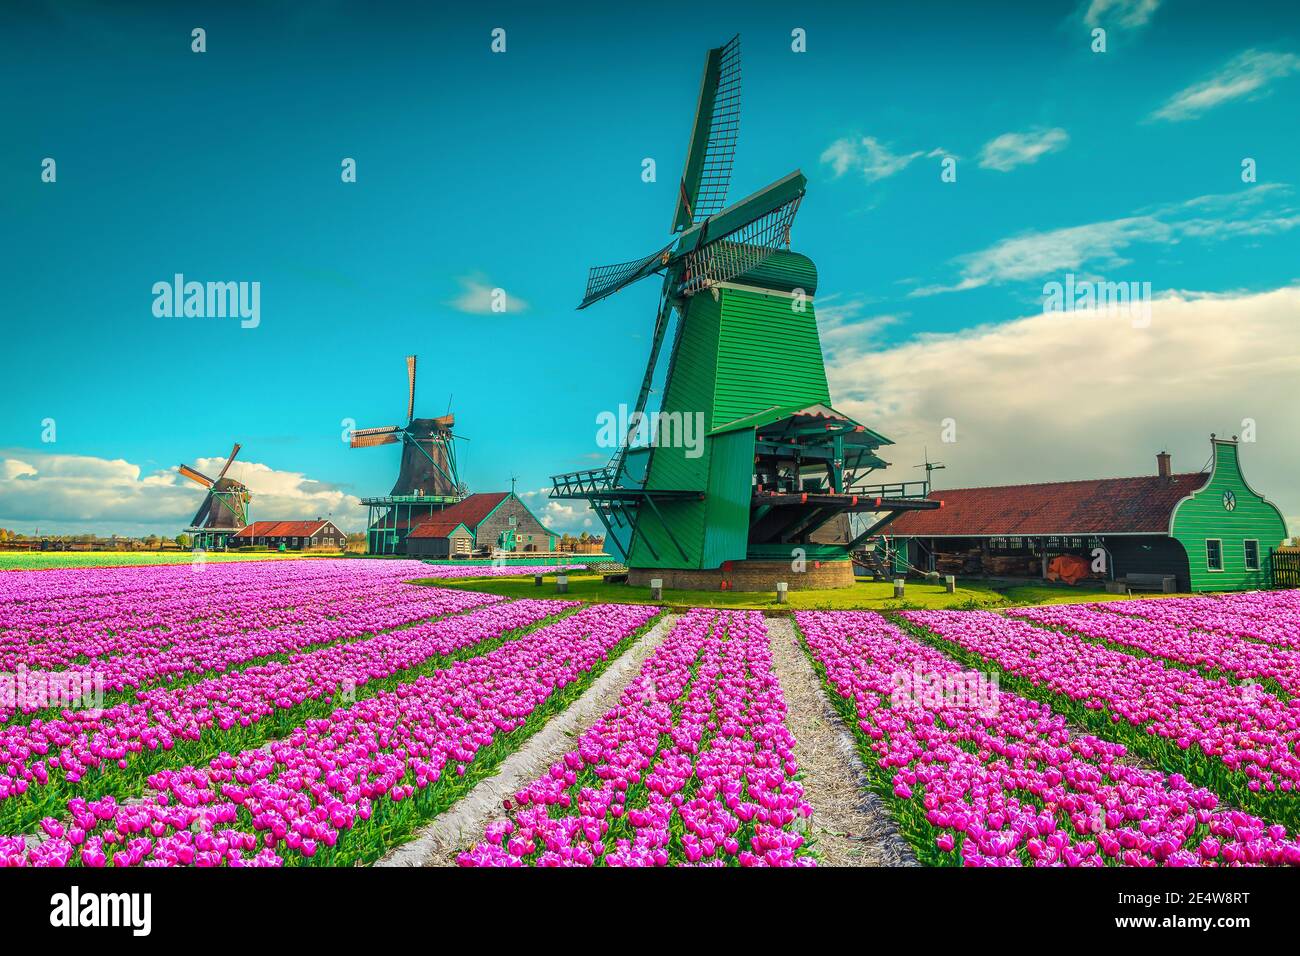 Picturesque place with colorful tulip plantations and old windmills in Netherlands, Europe Stock Photo